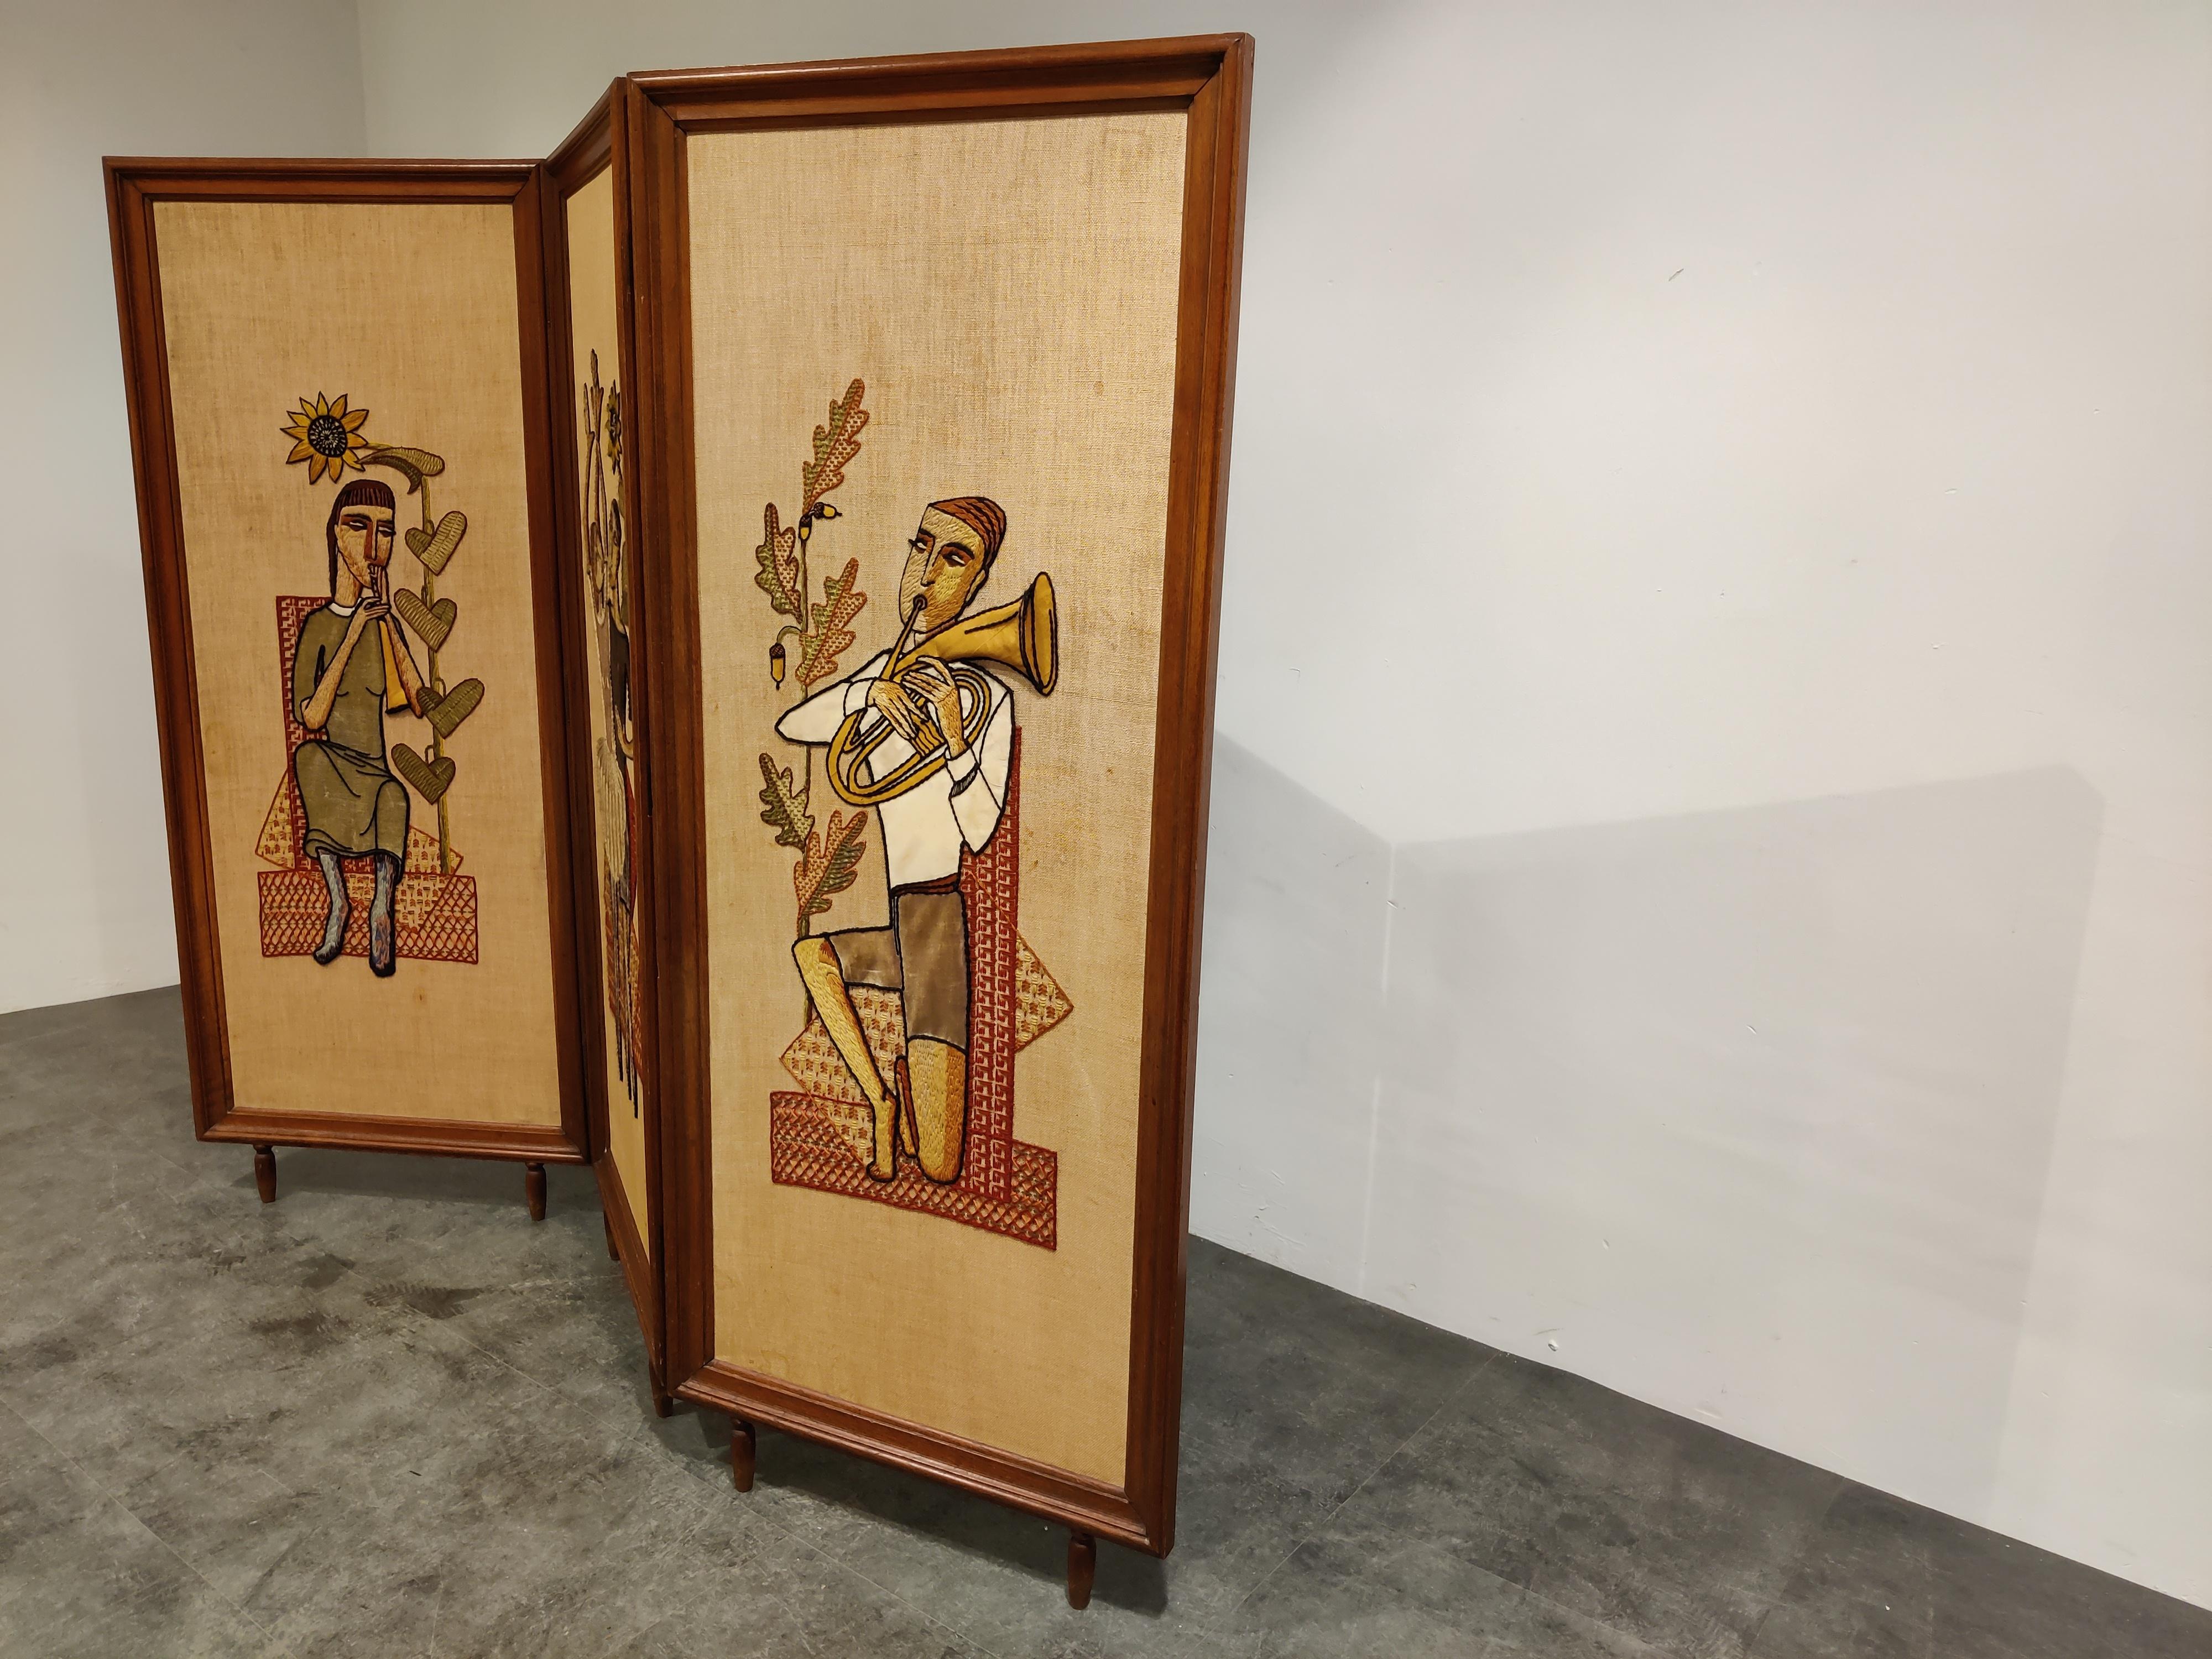 Charming vintage 'paravent' or folding screen completely handwoven in a brown wooden frame.

The artwork depicts figures in a curious way in a musical atmosphere.

Nice details and beautiful original colors.

This piece can really add a great